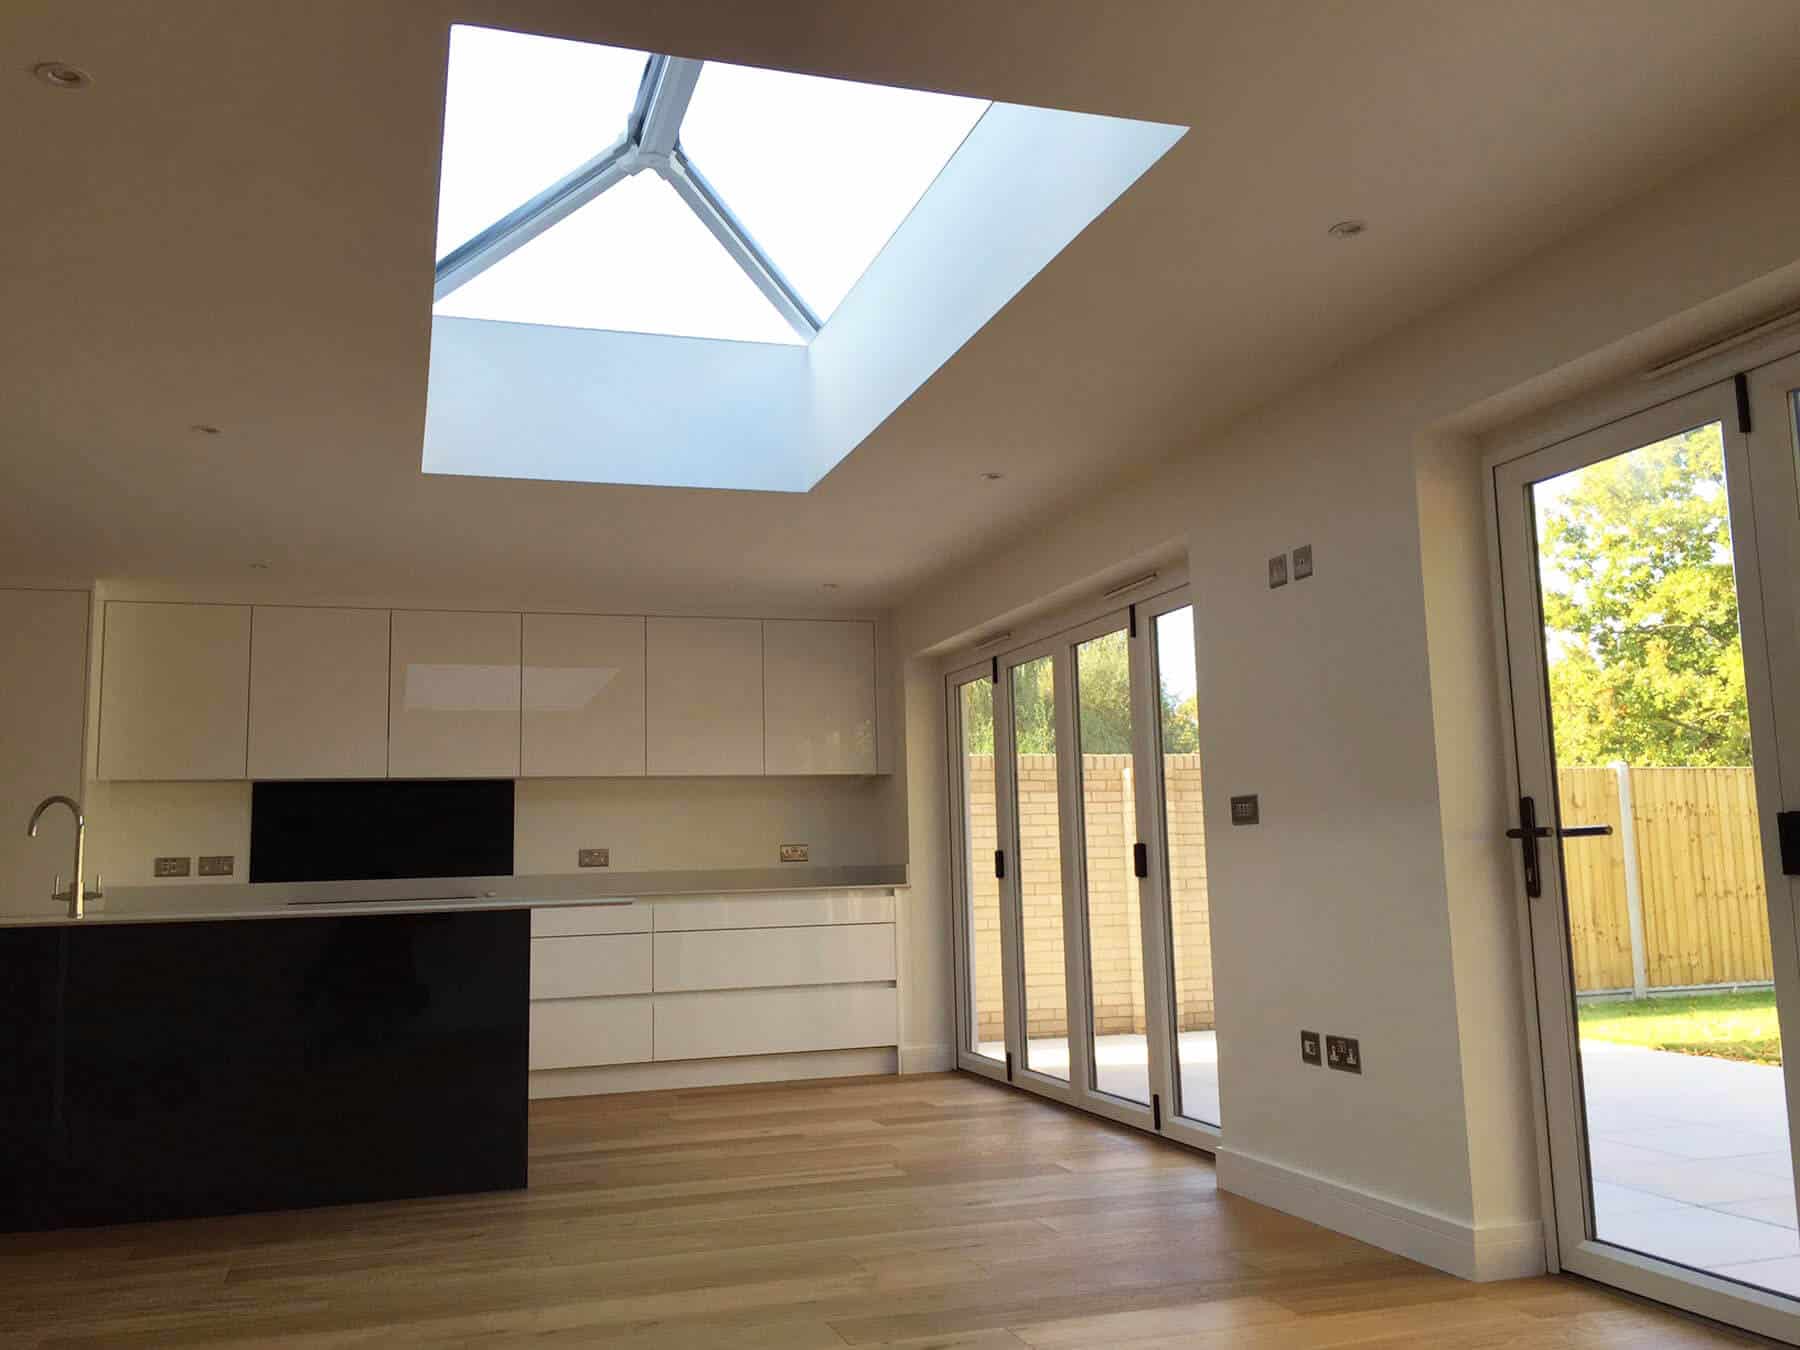 Extension with a white roof lantern